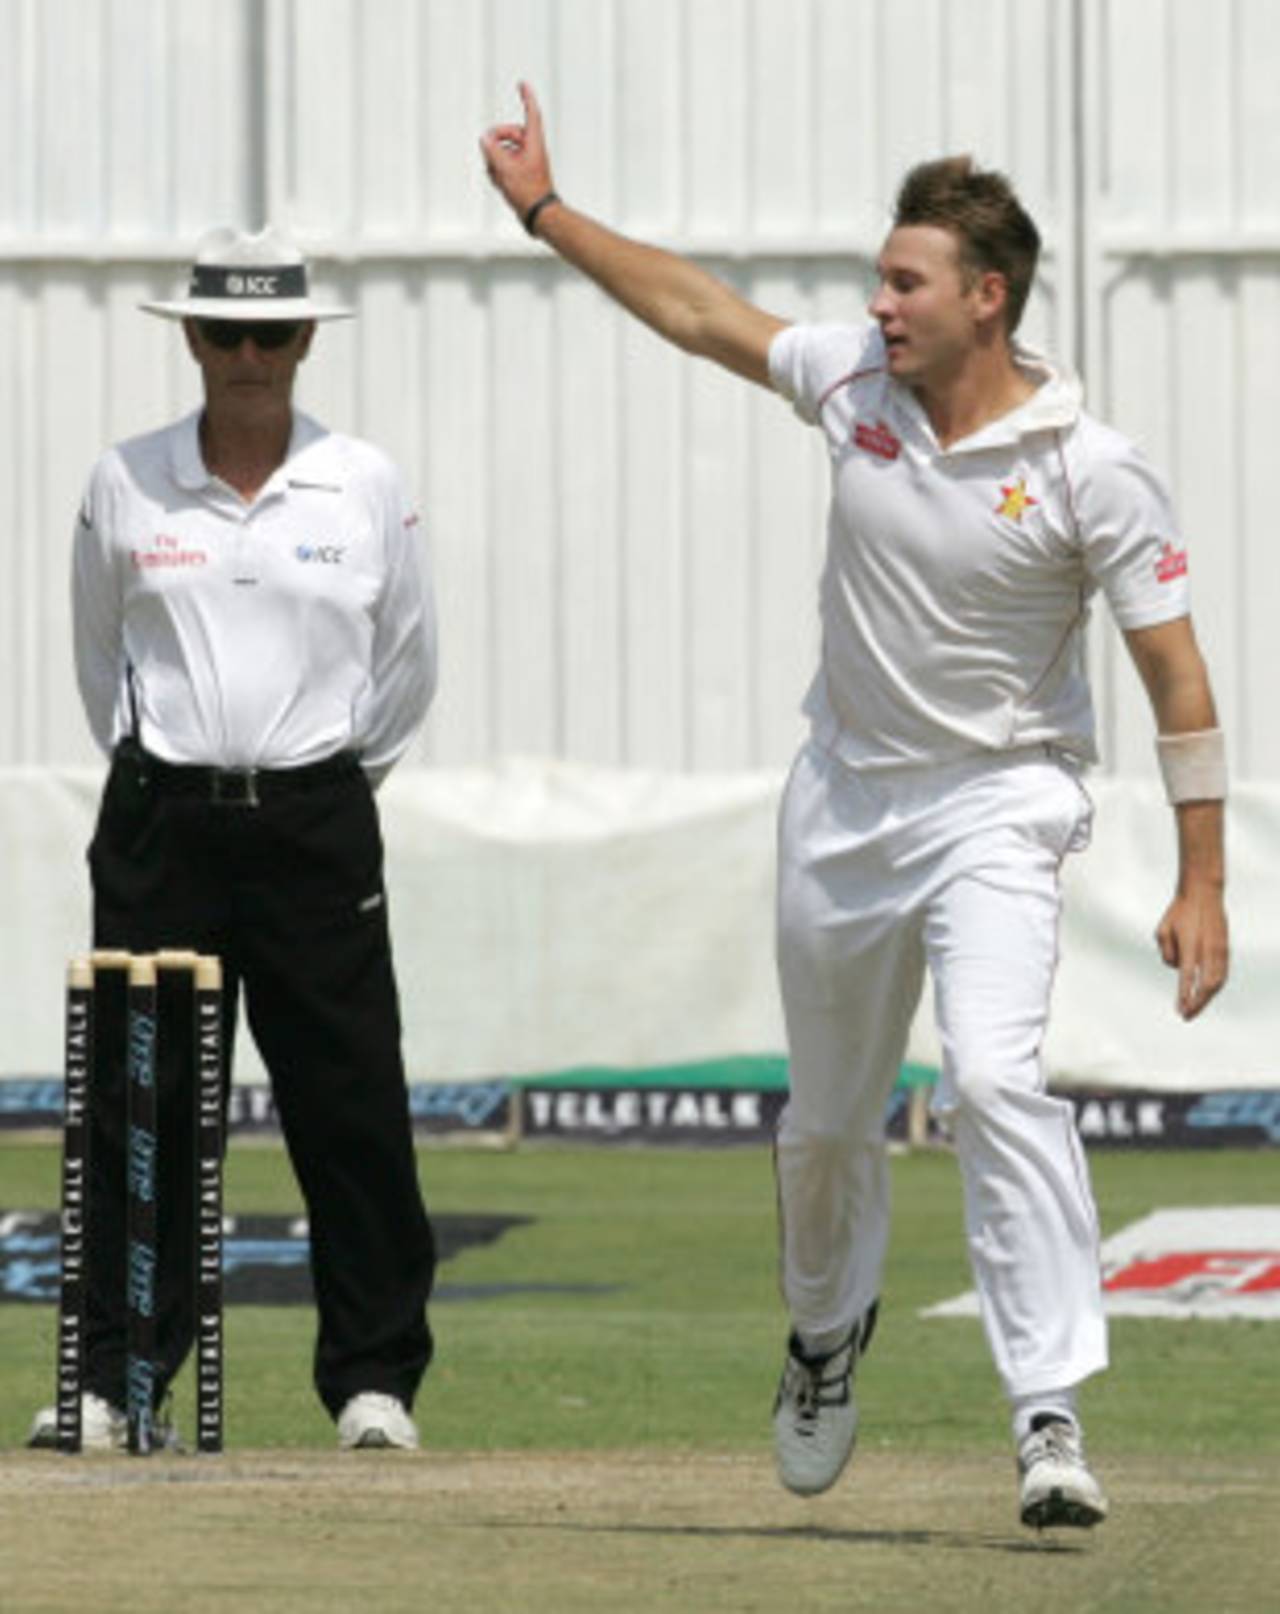 Kyle Jarvis picked up three wickets in the second innings, Zimbabwe v Bangladesh, 1st Test, 4th day, Harare, April 20, 2013